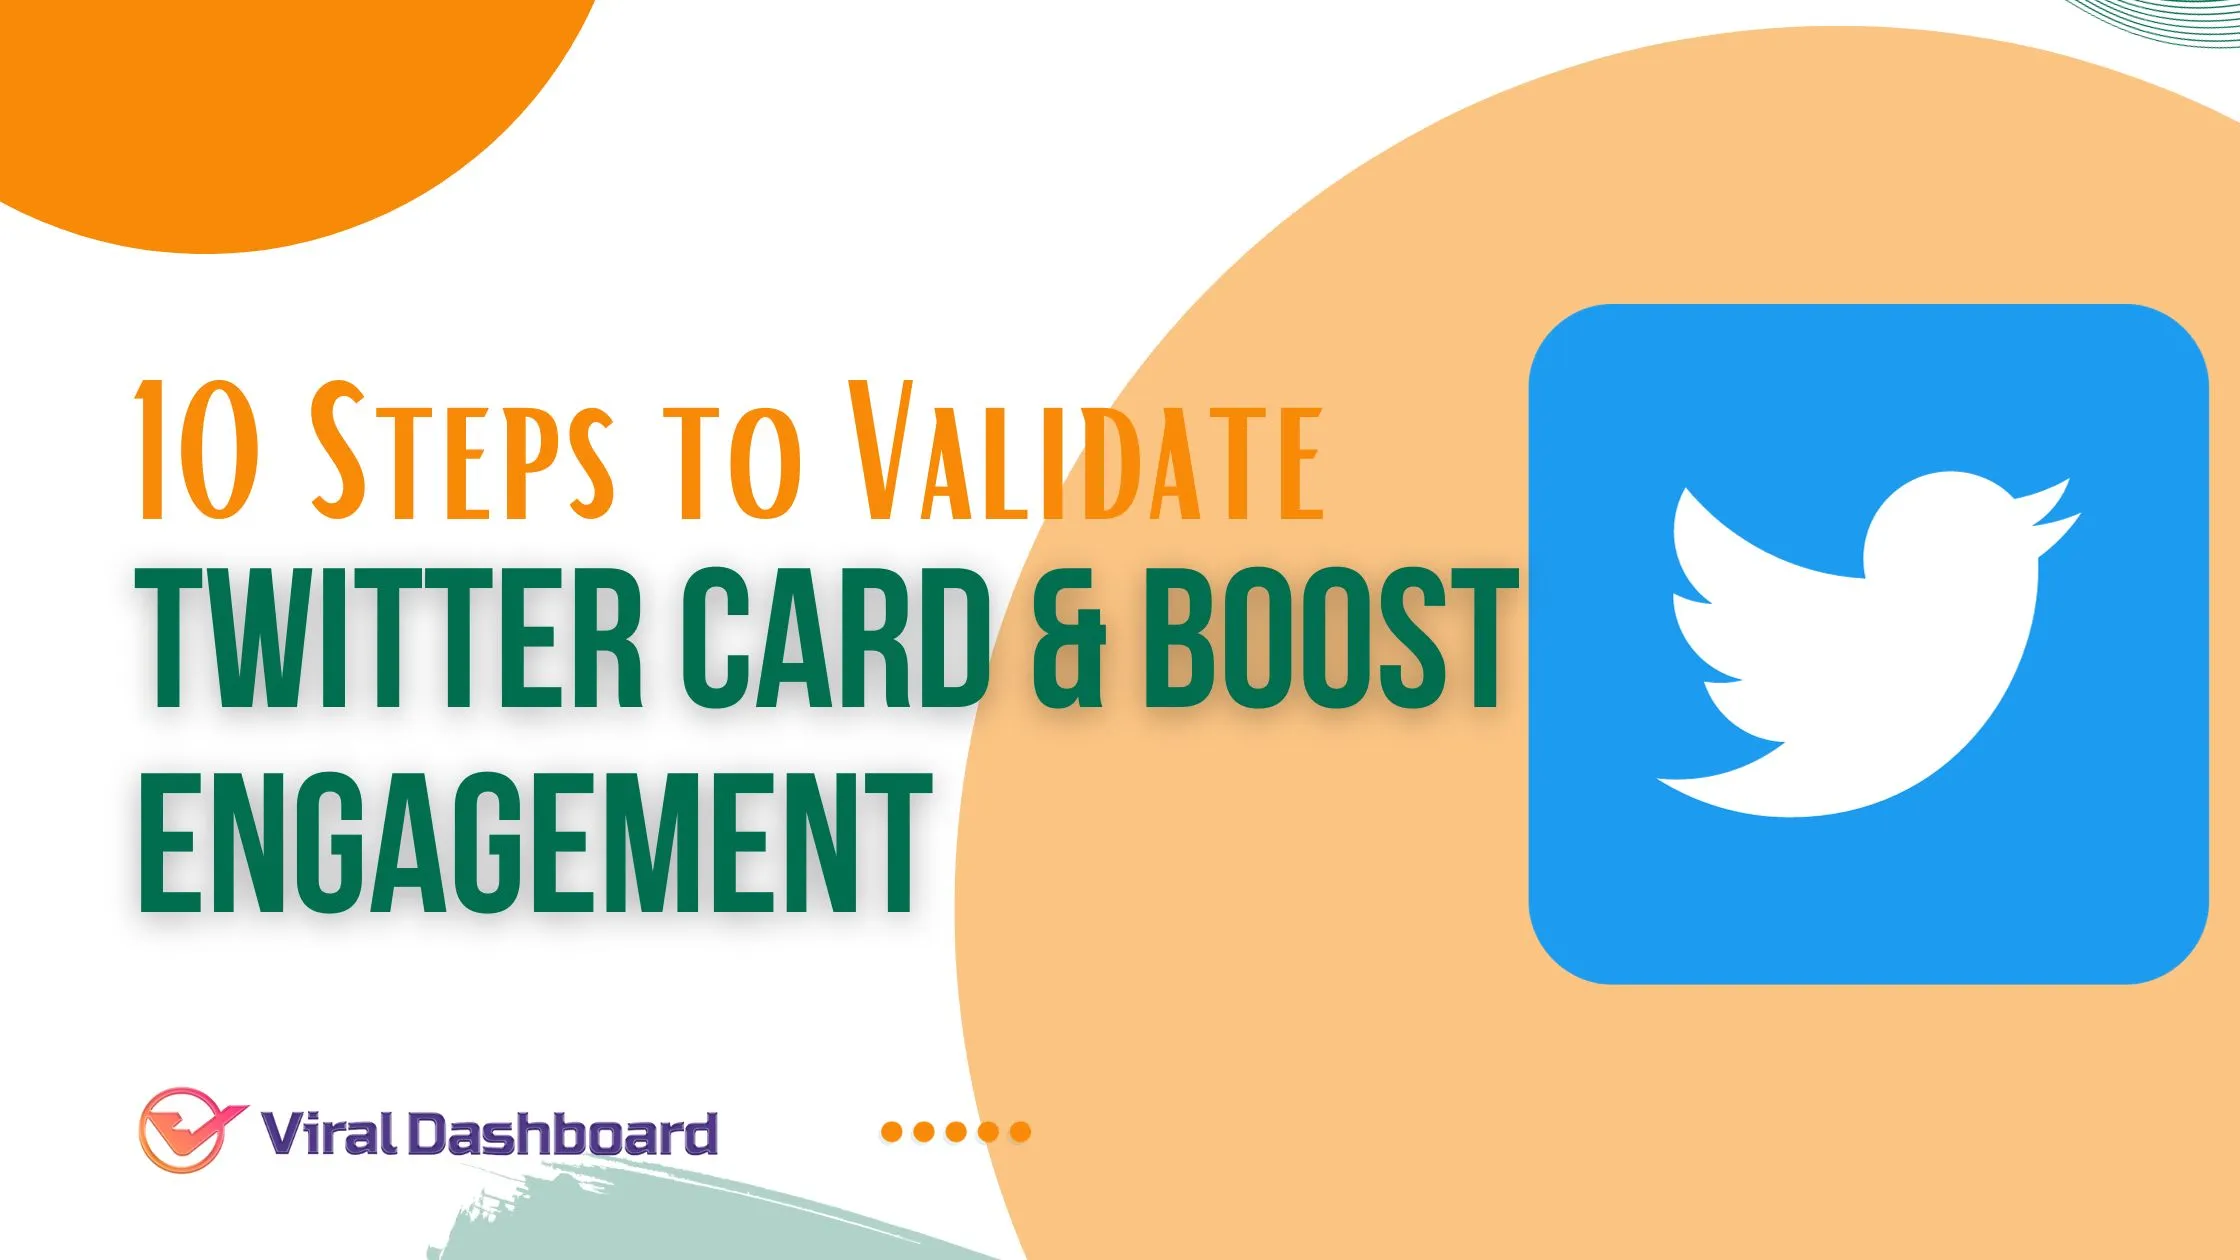 10 Steps to Validate Twitter Card & Boost Engagement